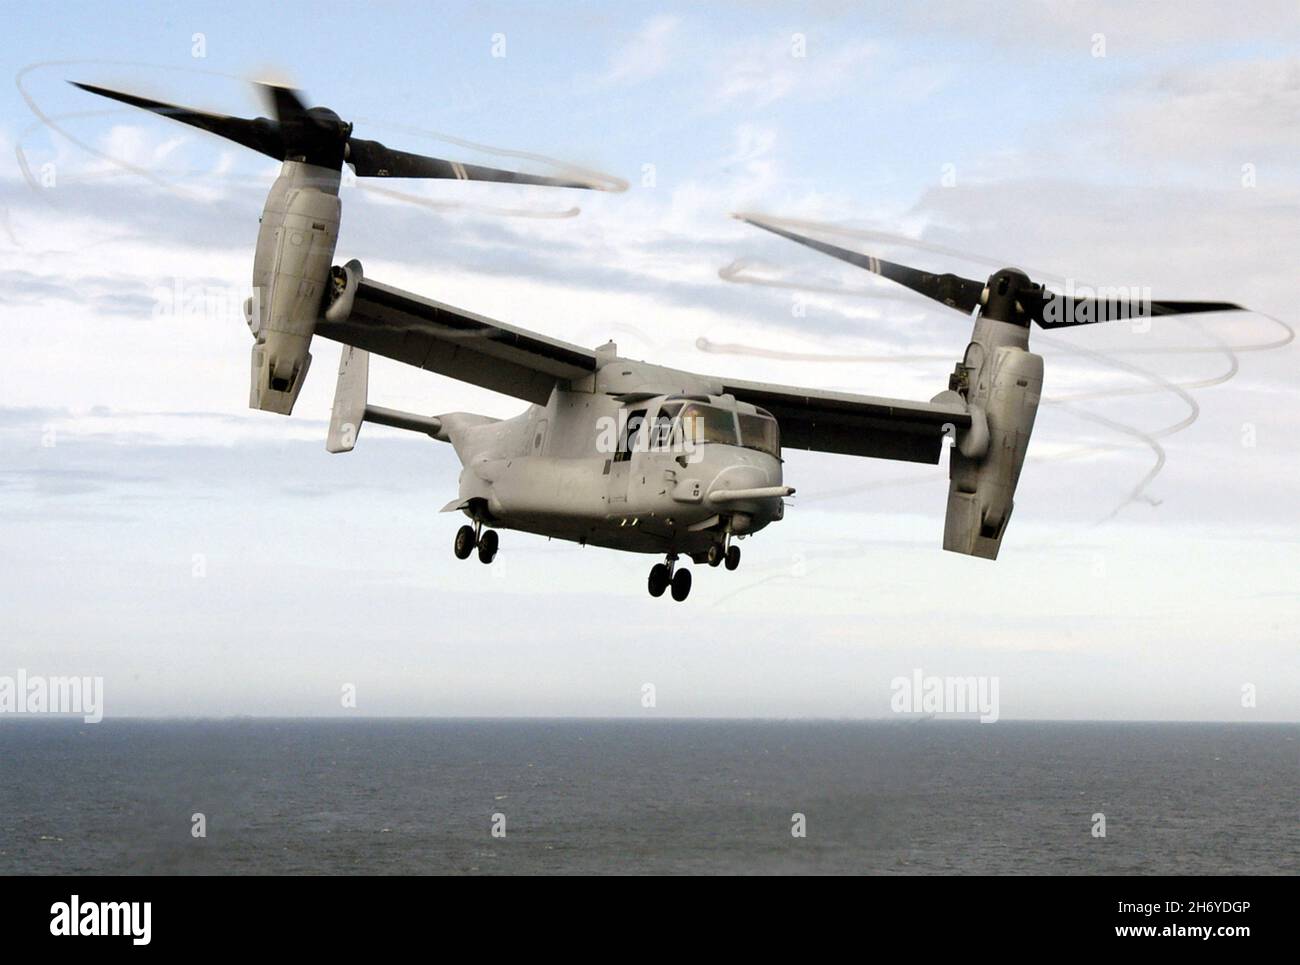 MV 22B OSPREY vertical/short run take off aircraft operated by the US Marine Corps.  Photo  taken  2005 by USMC Stock Photo